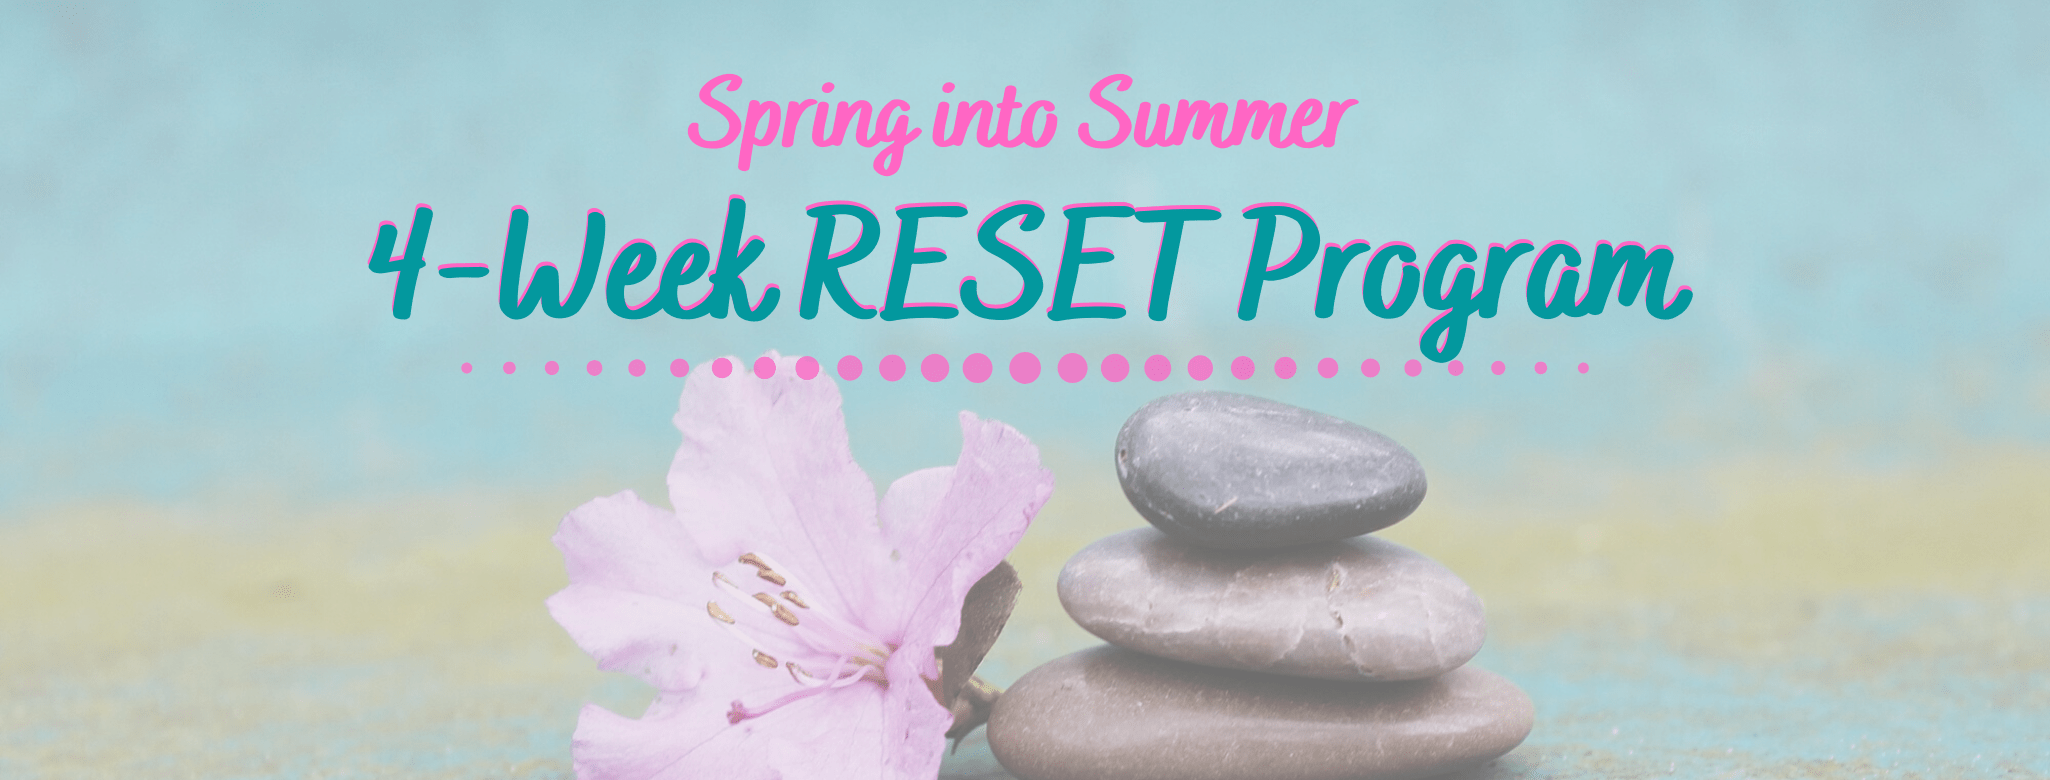 Spring into Summer RESET